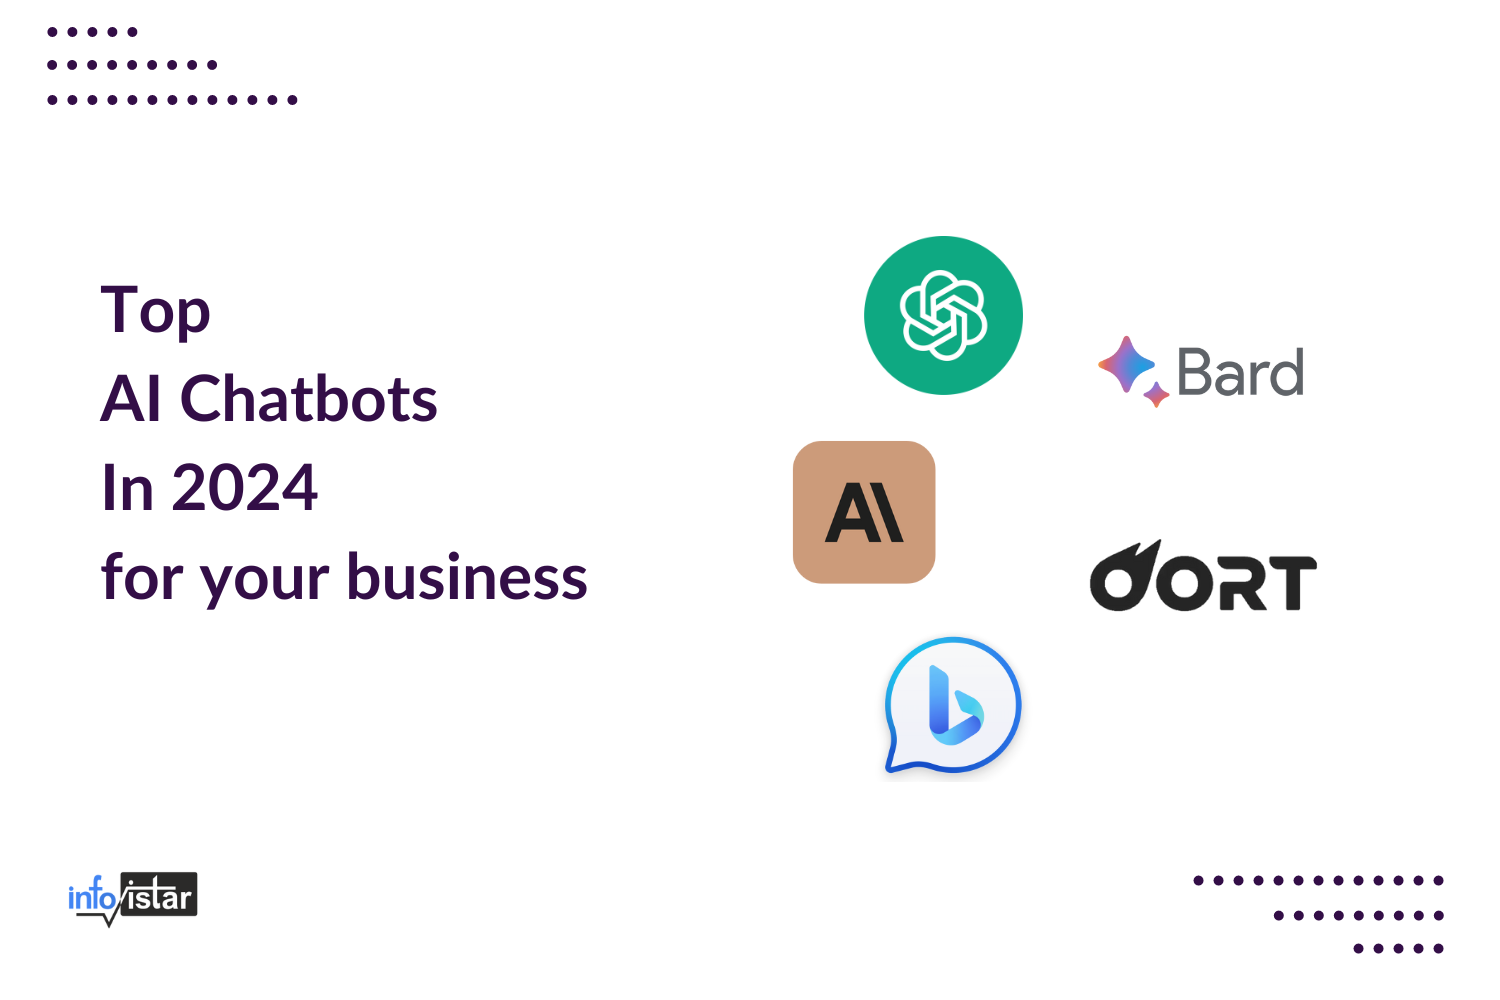 Top AI Chatbots In 2024 Choosing the right bot for your business